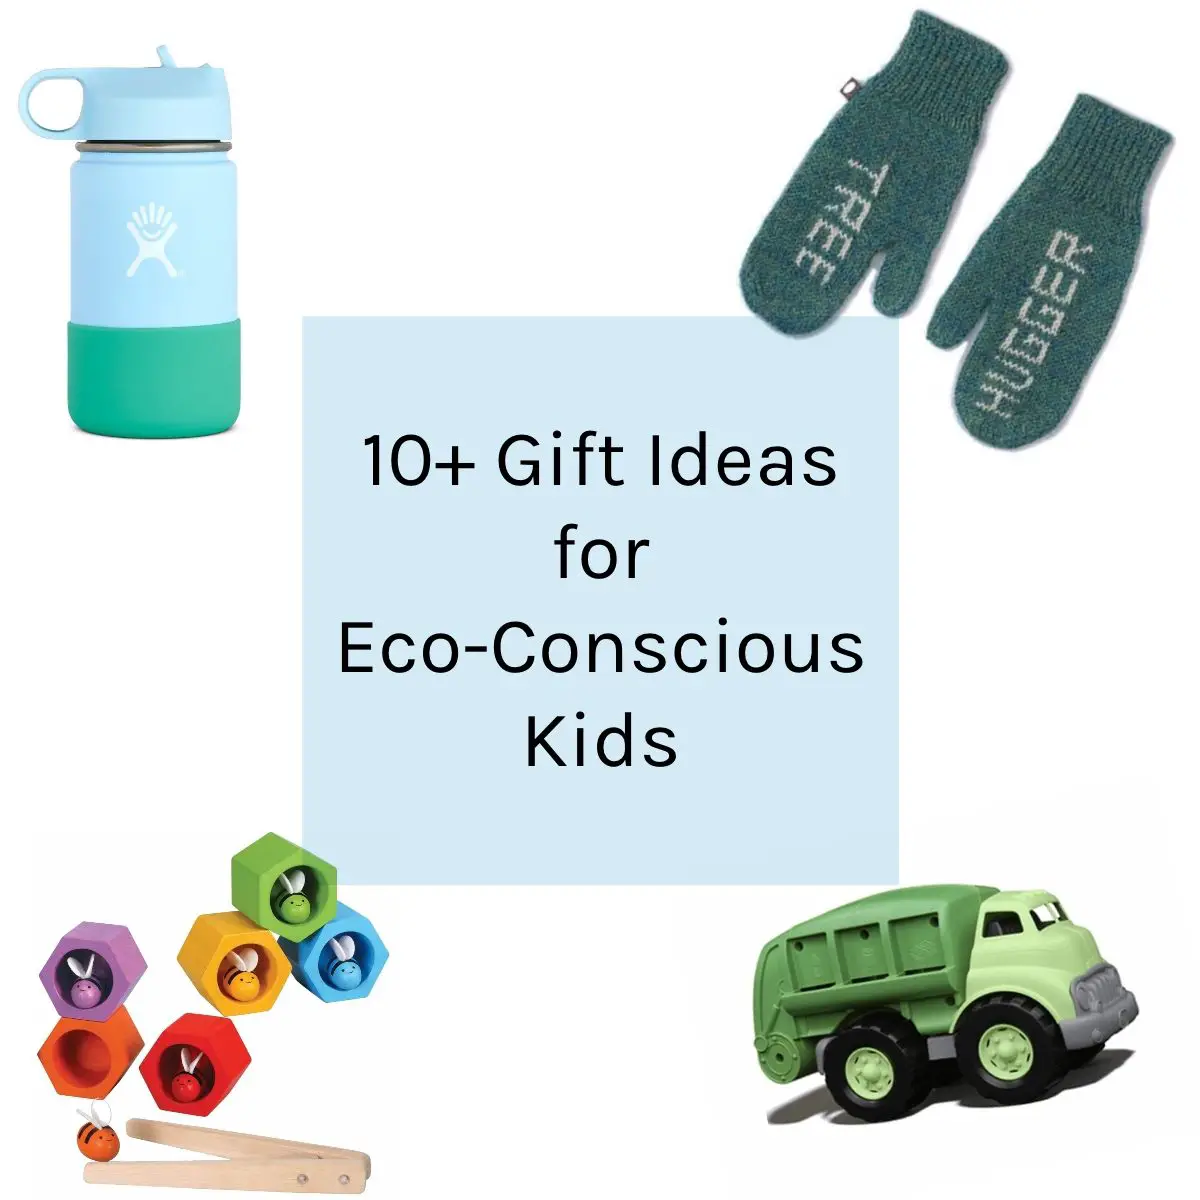 10+ Gift Ideas for Eco-Conscious K